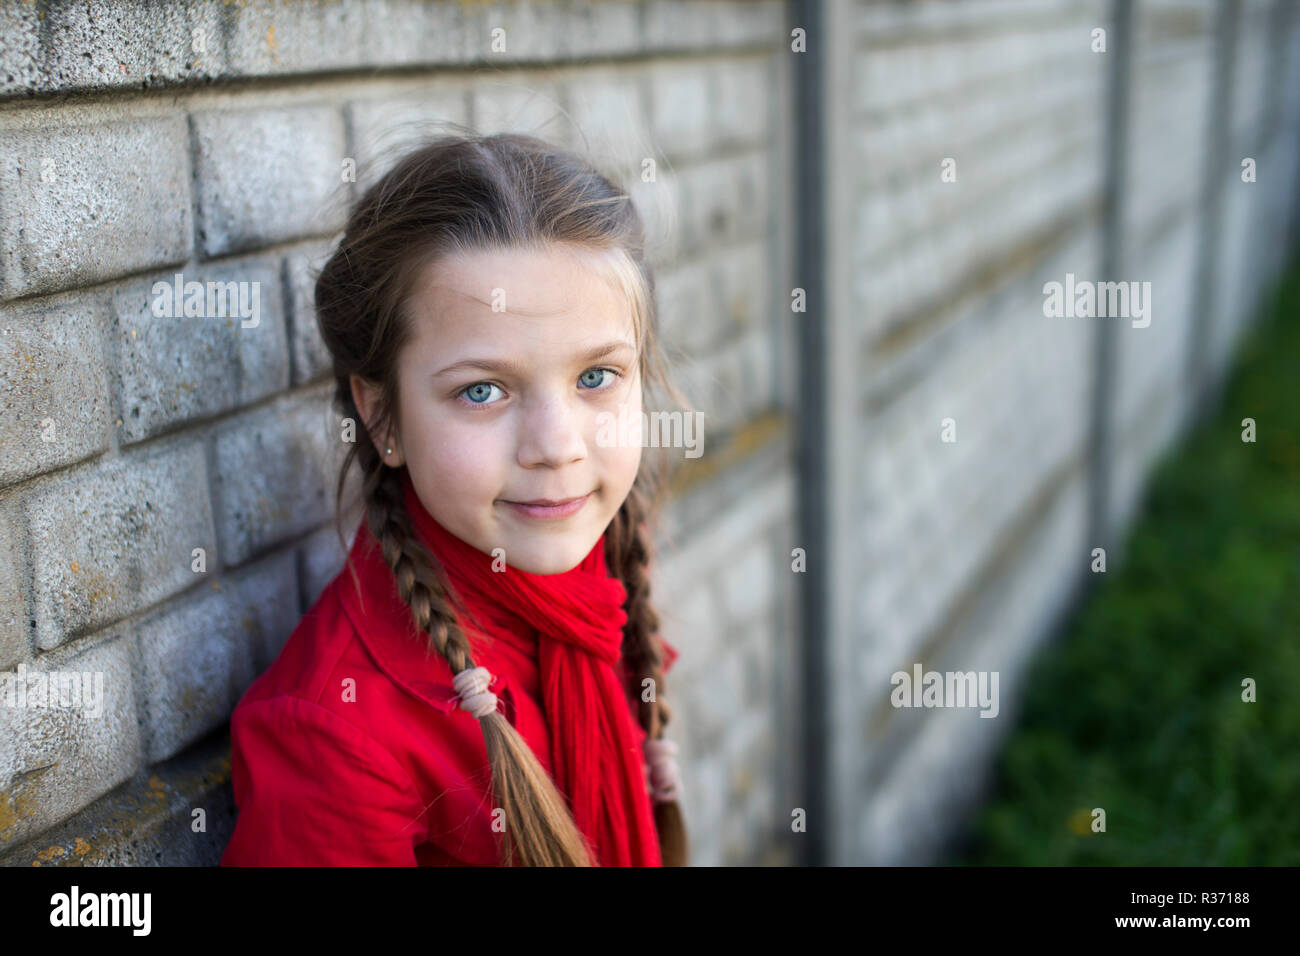 girl in red raincoat near concrete fence outdoor Stock Photo